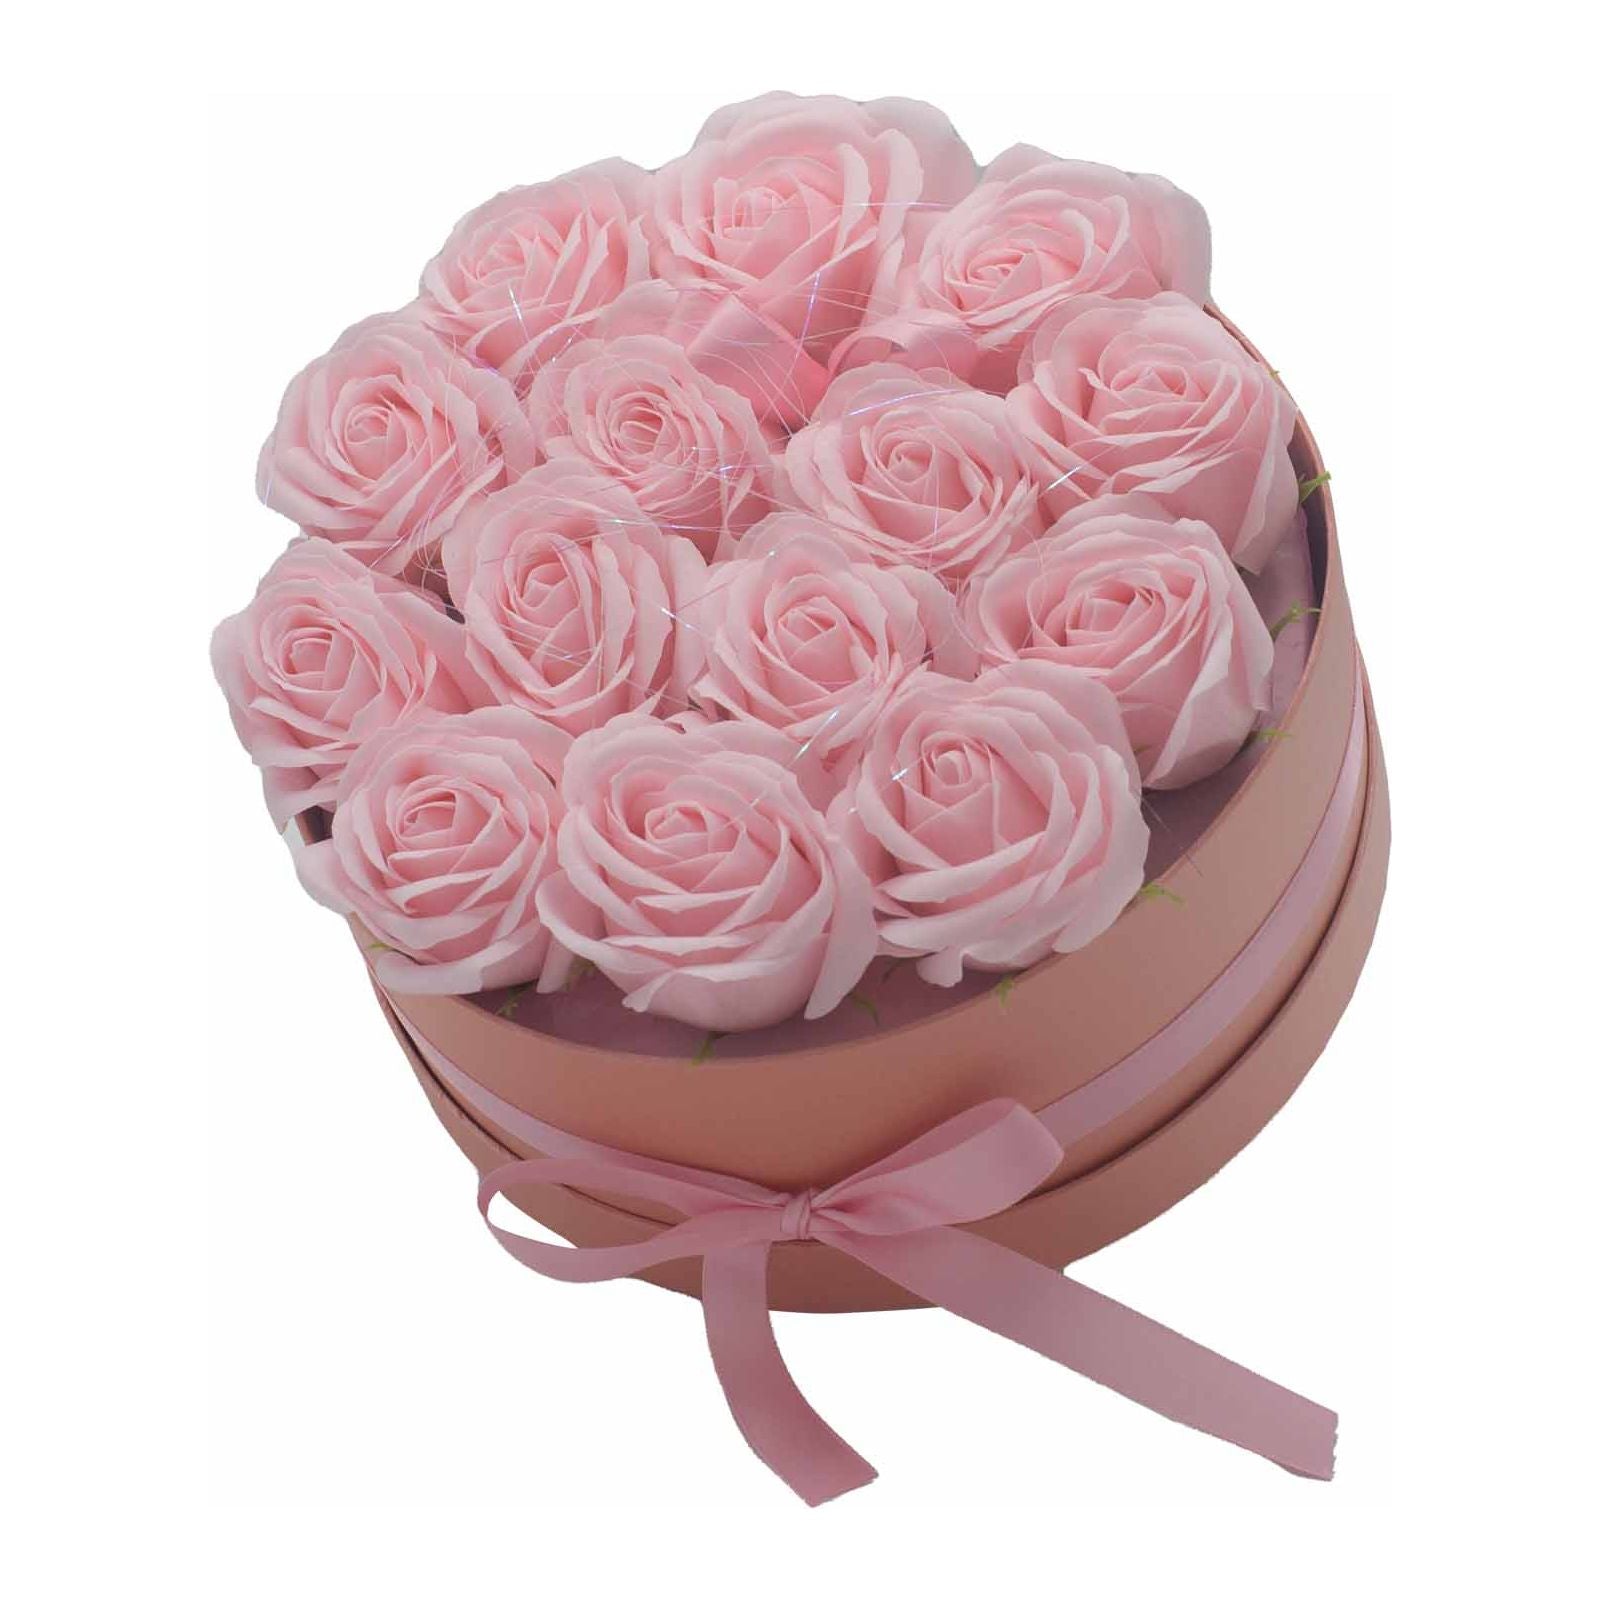 Soap Flower Gift Bouquet - 14 Pink Roses - Round - Ashton and Finch